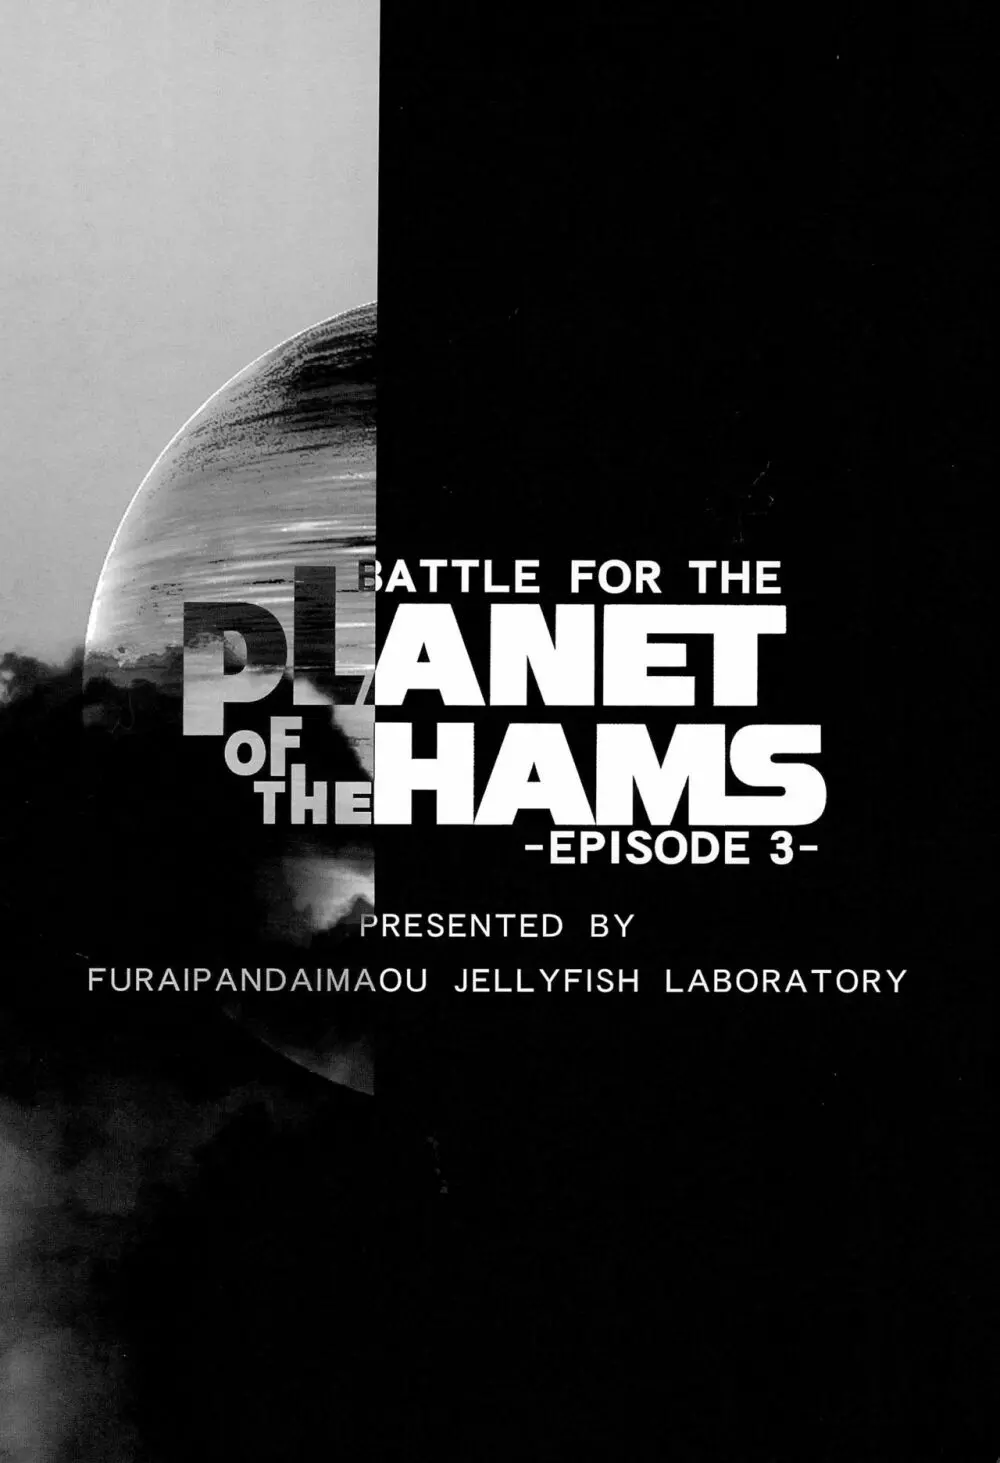 BATTLE FOR THE PLANET OF THE HAMS -EPISODE 3- 24ページ